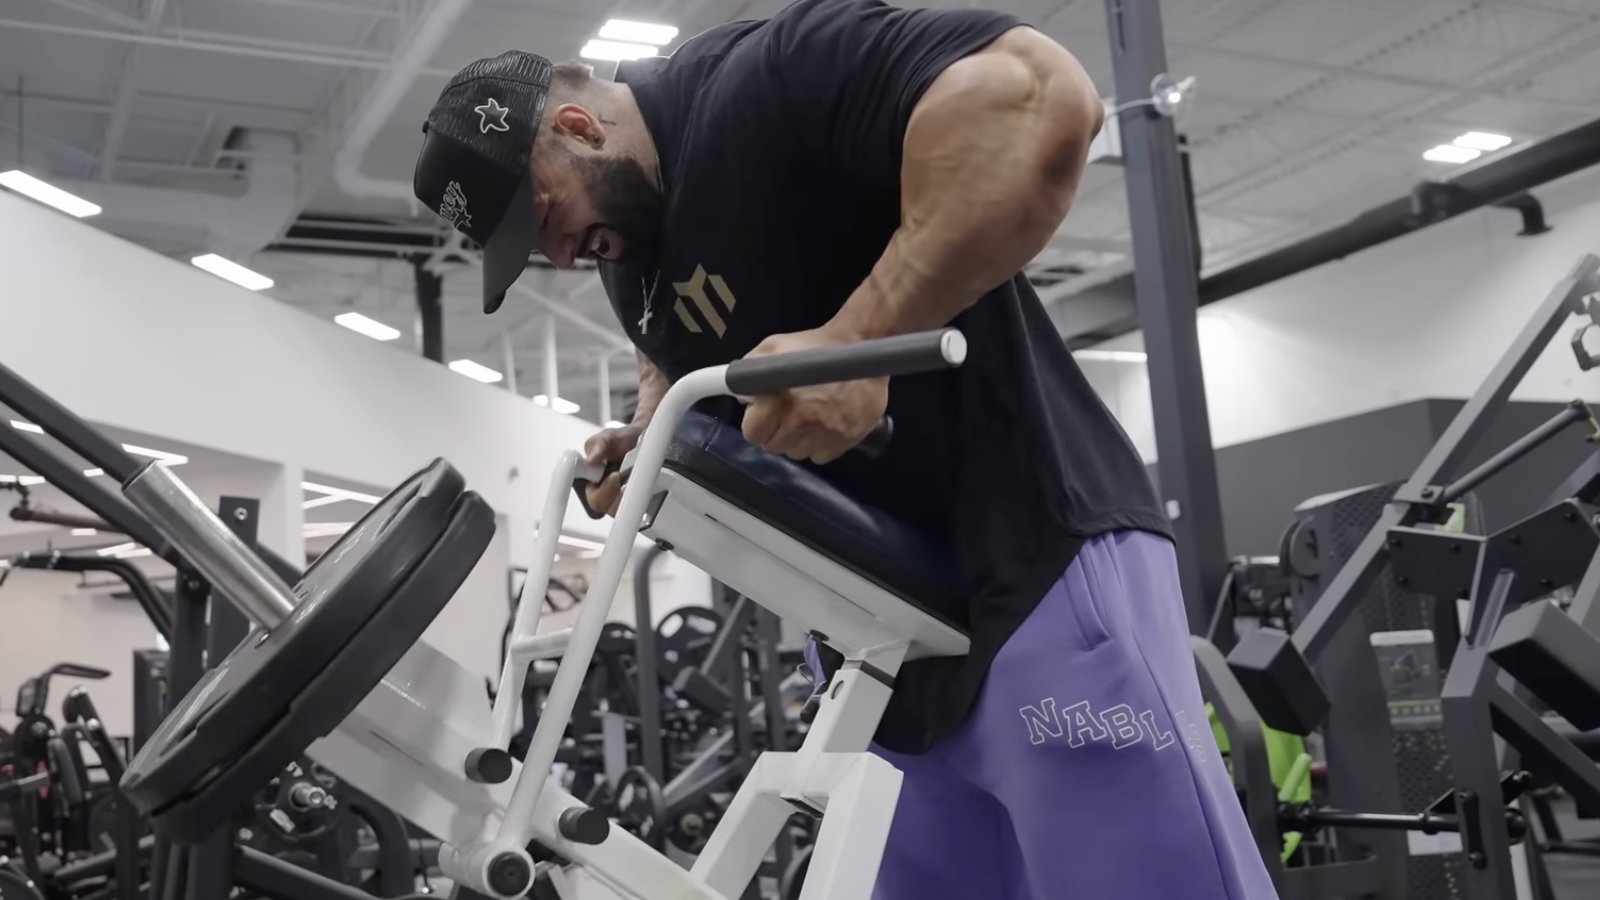 Regan Grimes Kicks Off 2023 Mr. Olympia Prep With Grueling Again and Biceps Exercise